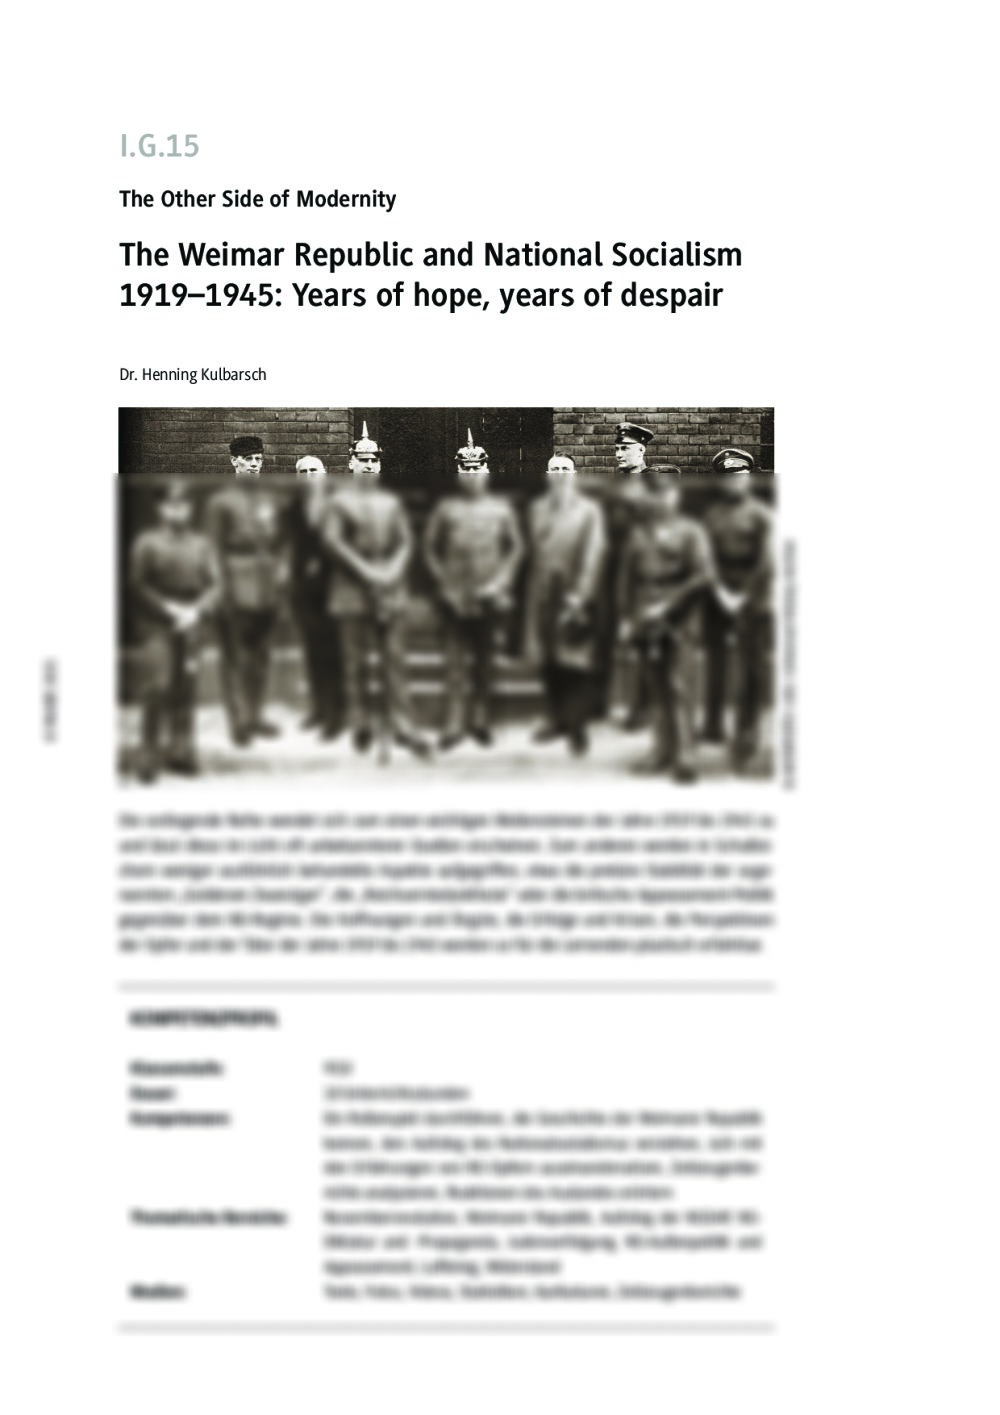 The Weimar Republic and National Socialism 1919 to 1945 - Seite 1